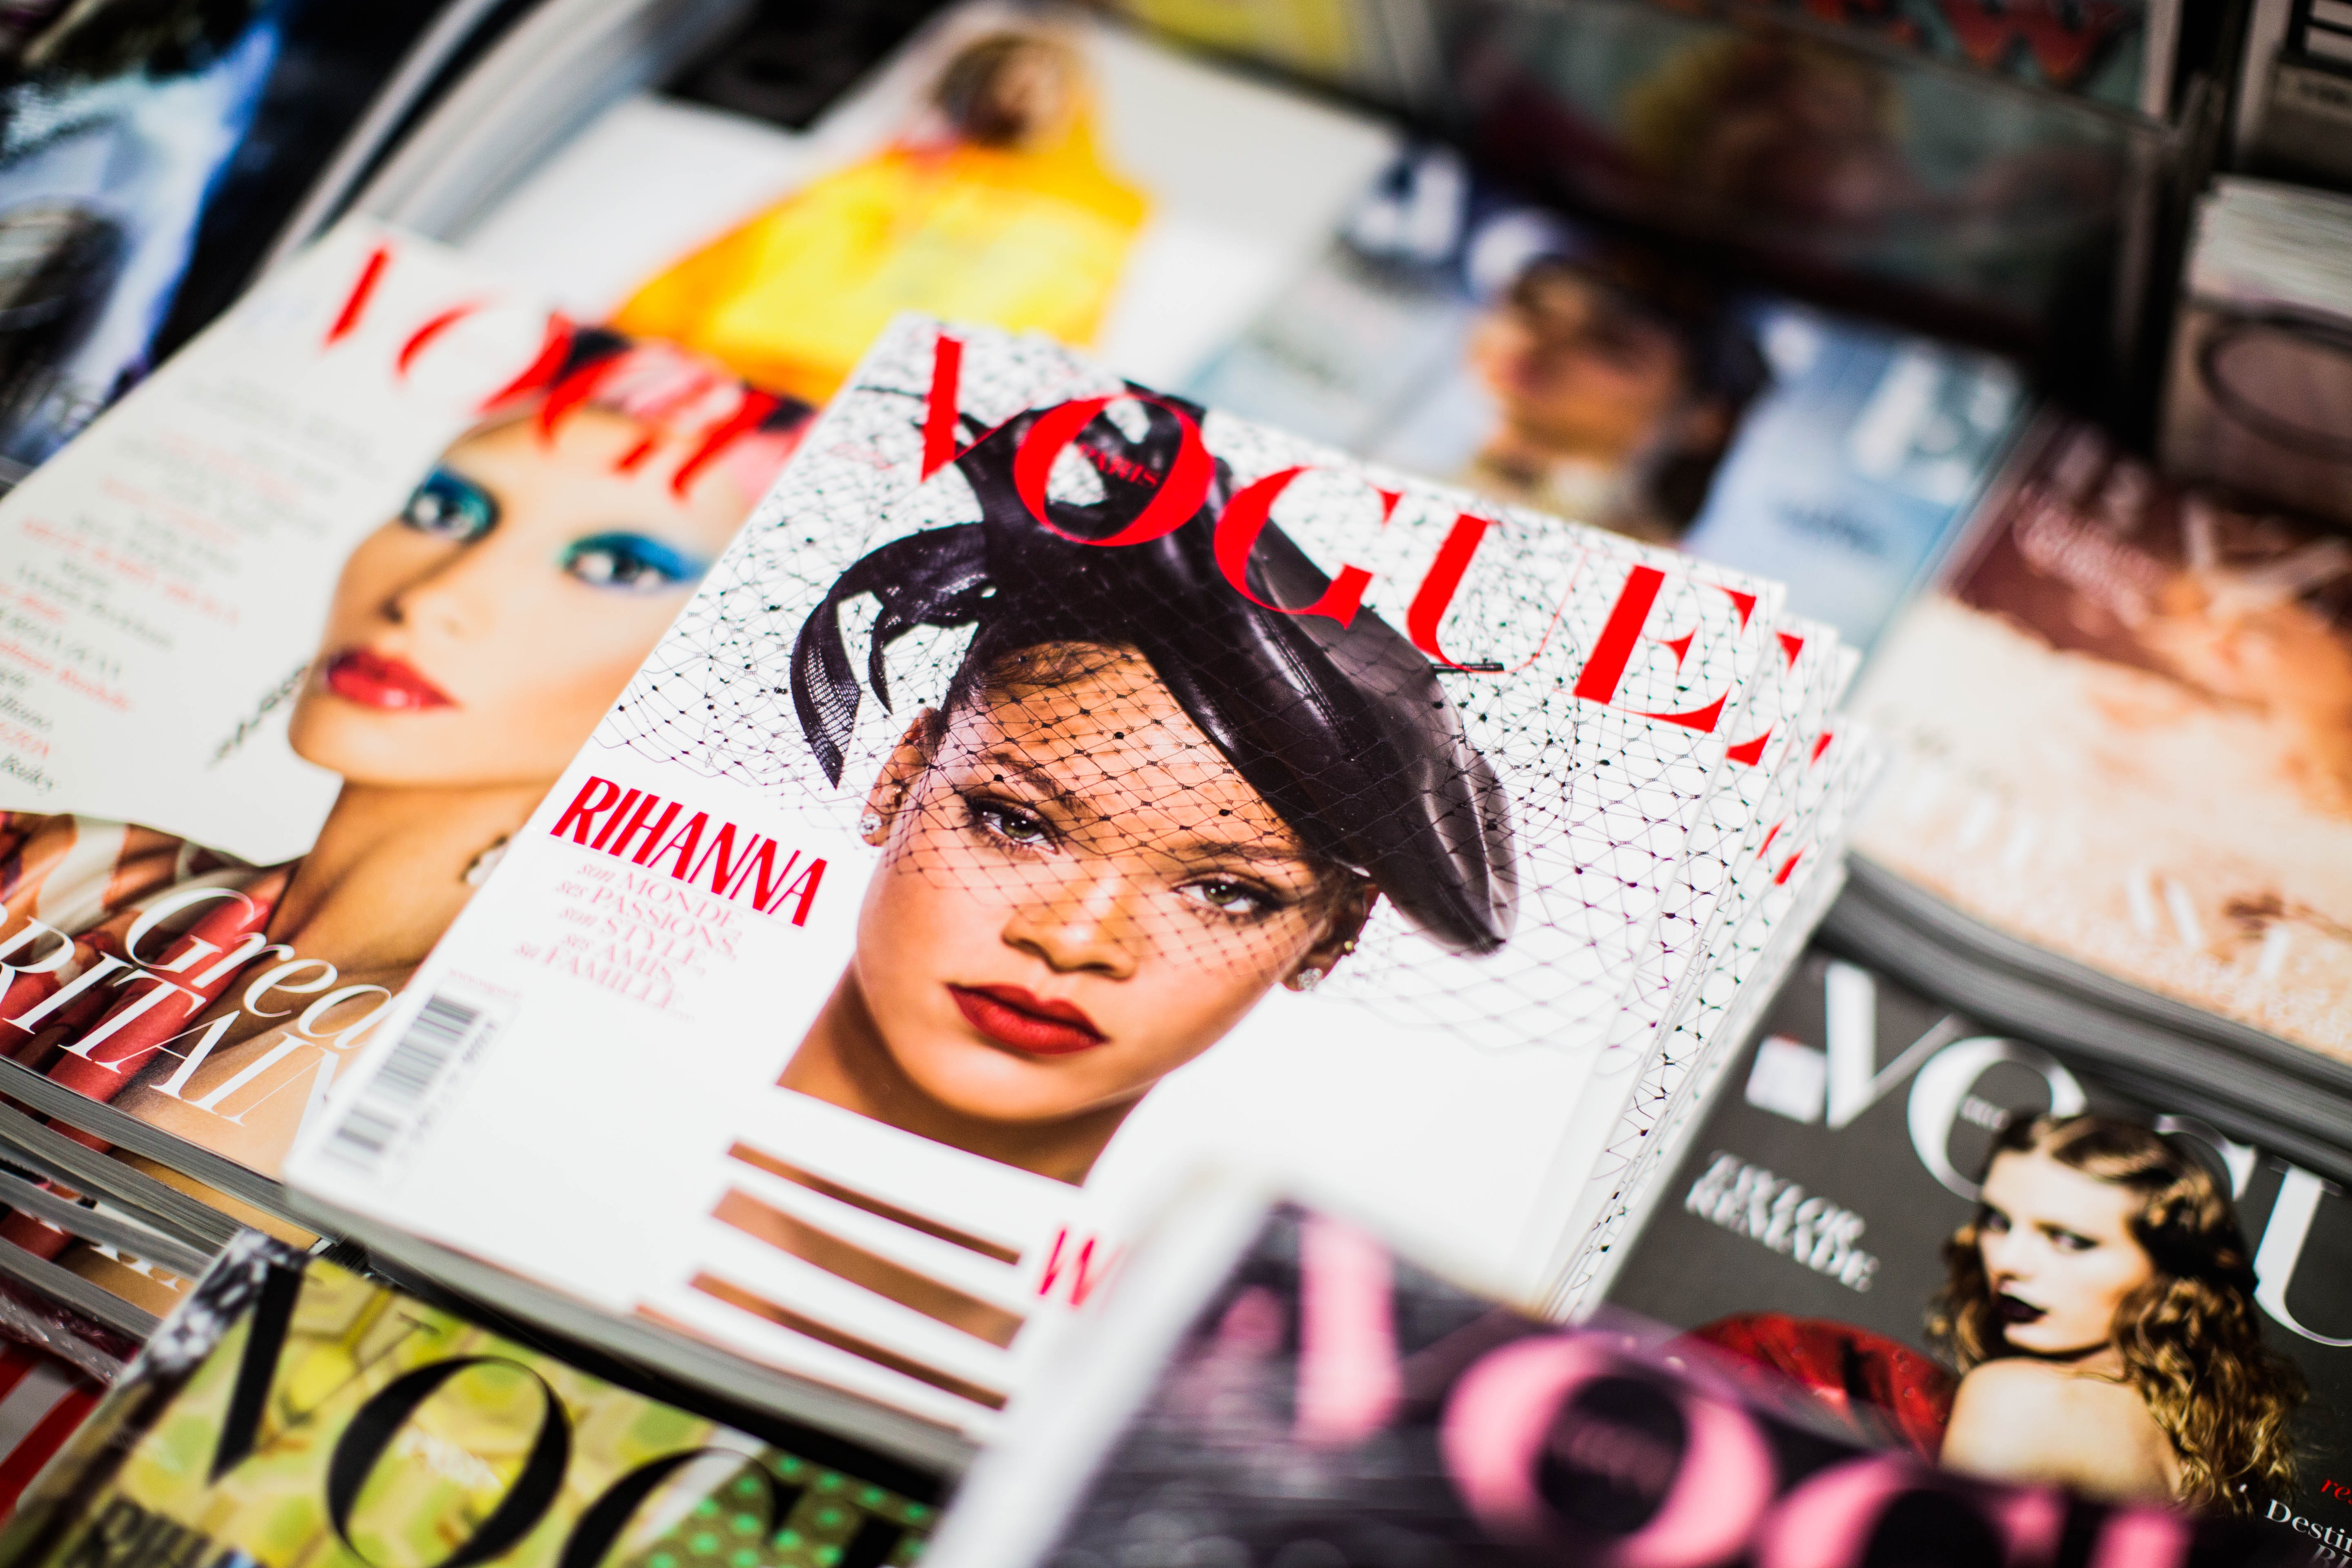 Vogue magazine with Rihanna on its cover